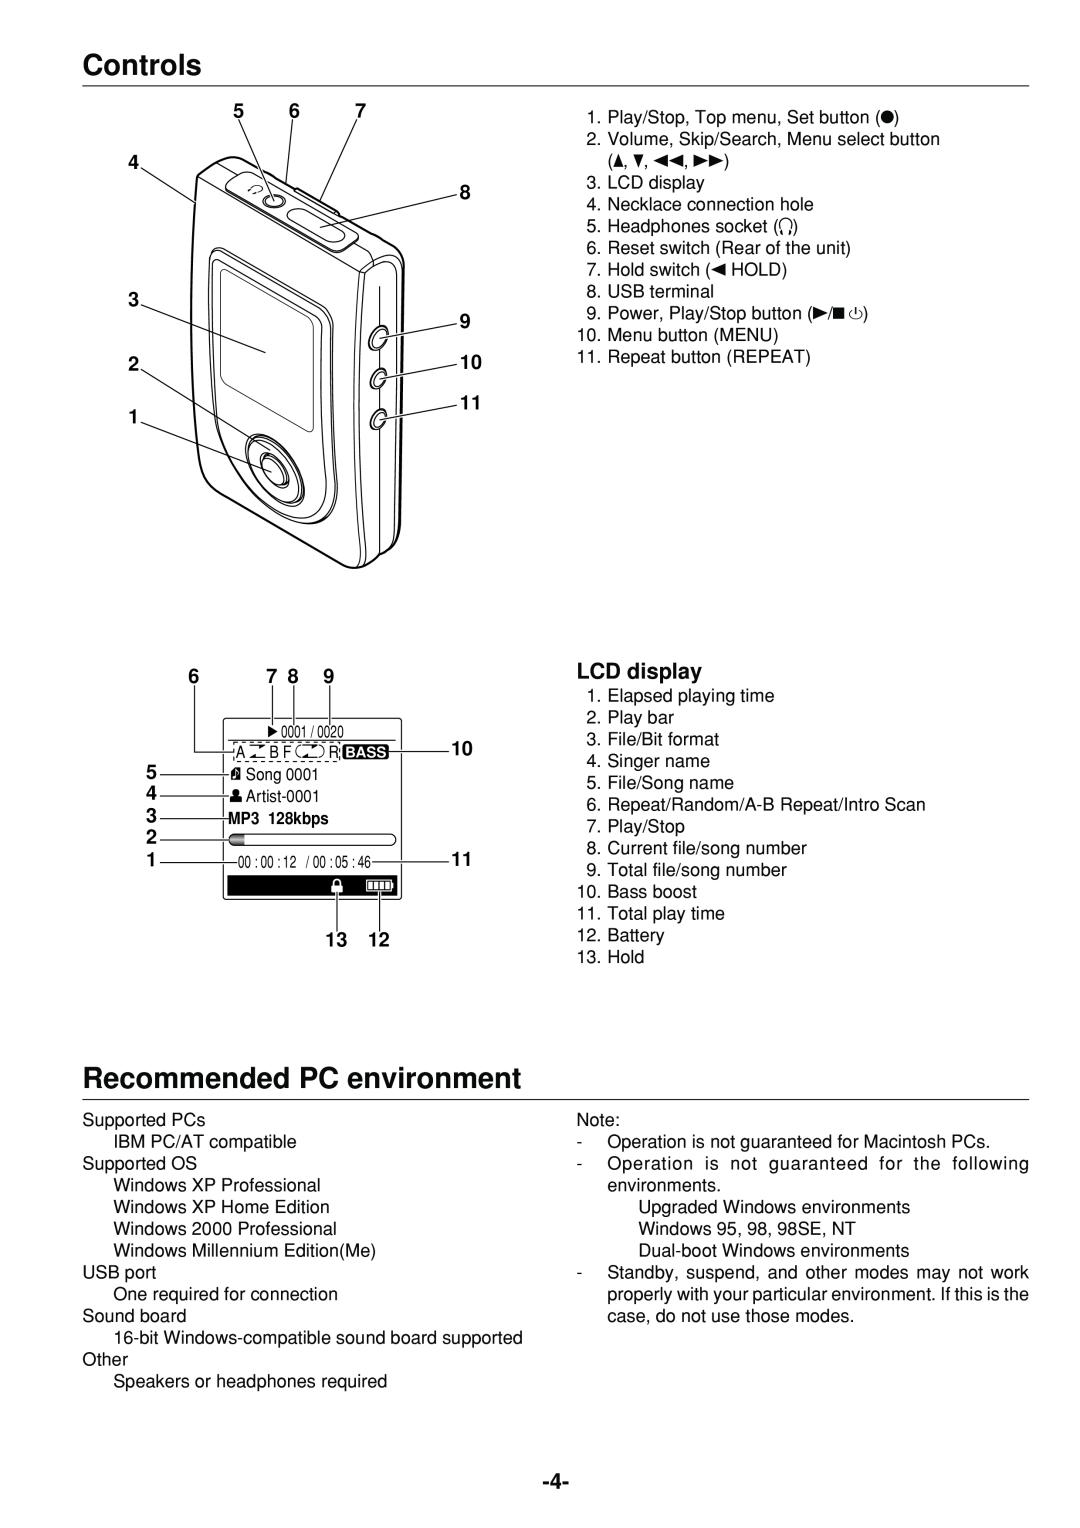 Sanyo HDP-M3000 instruction manual Controls, Recommended PC environment, LCD display, 5 6 4 8 3 9 210 